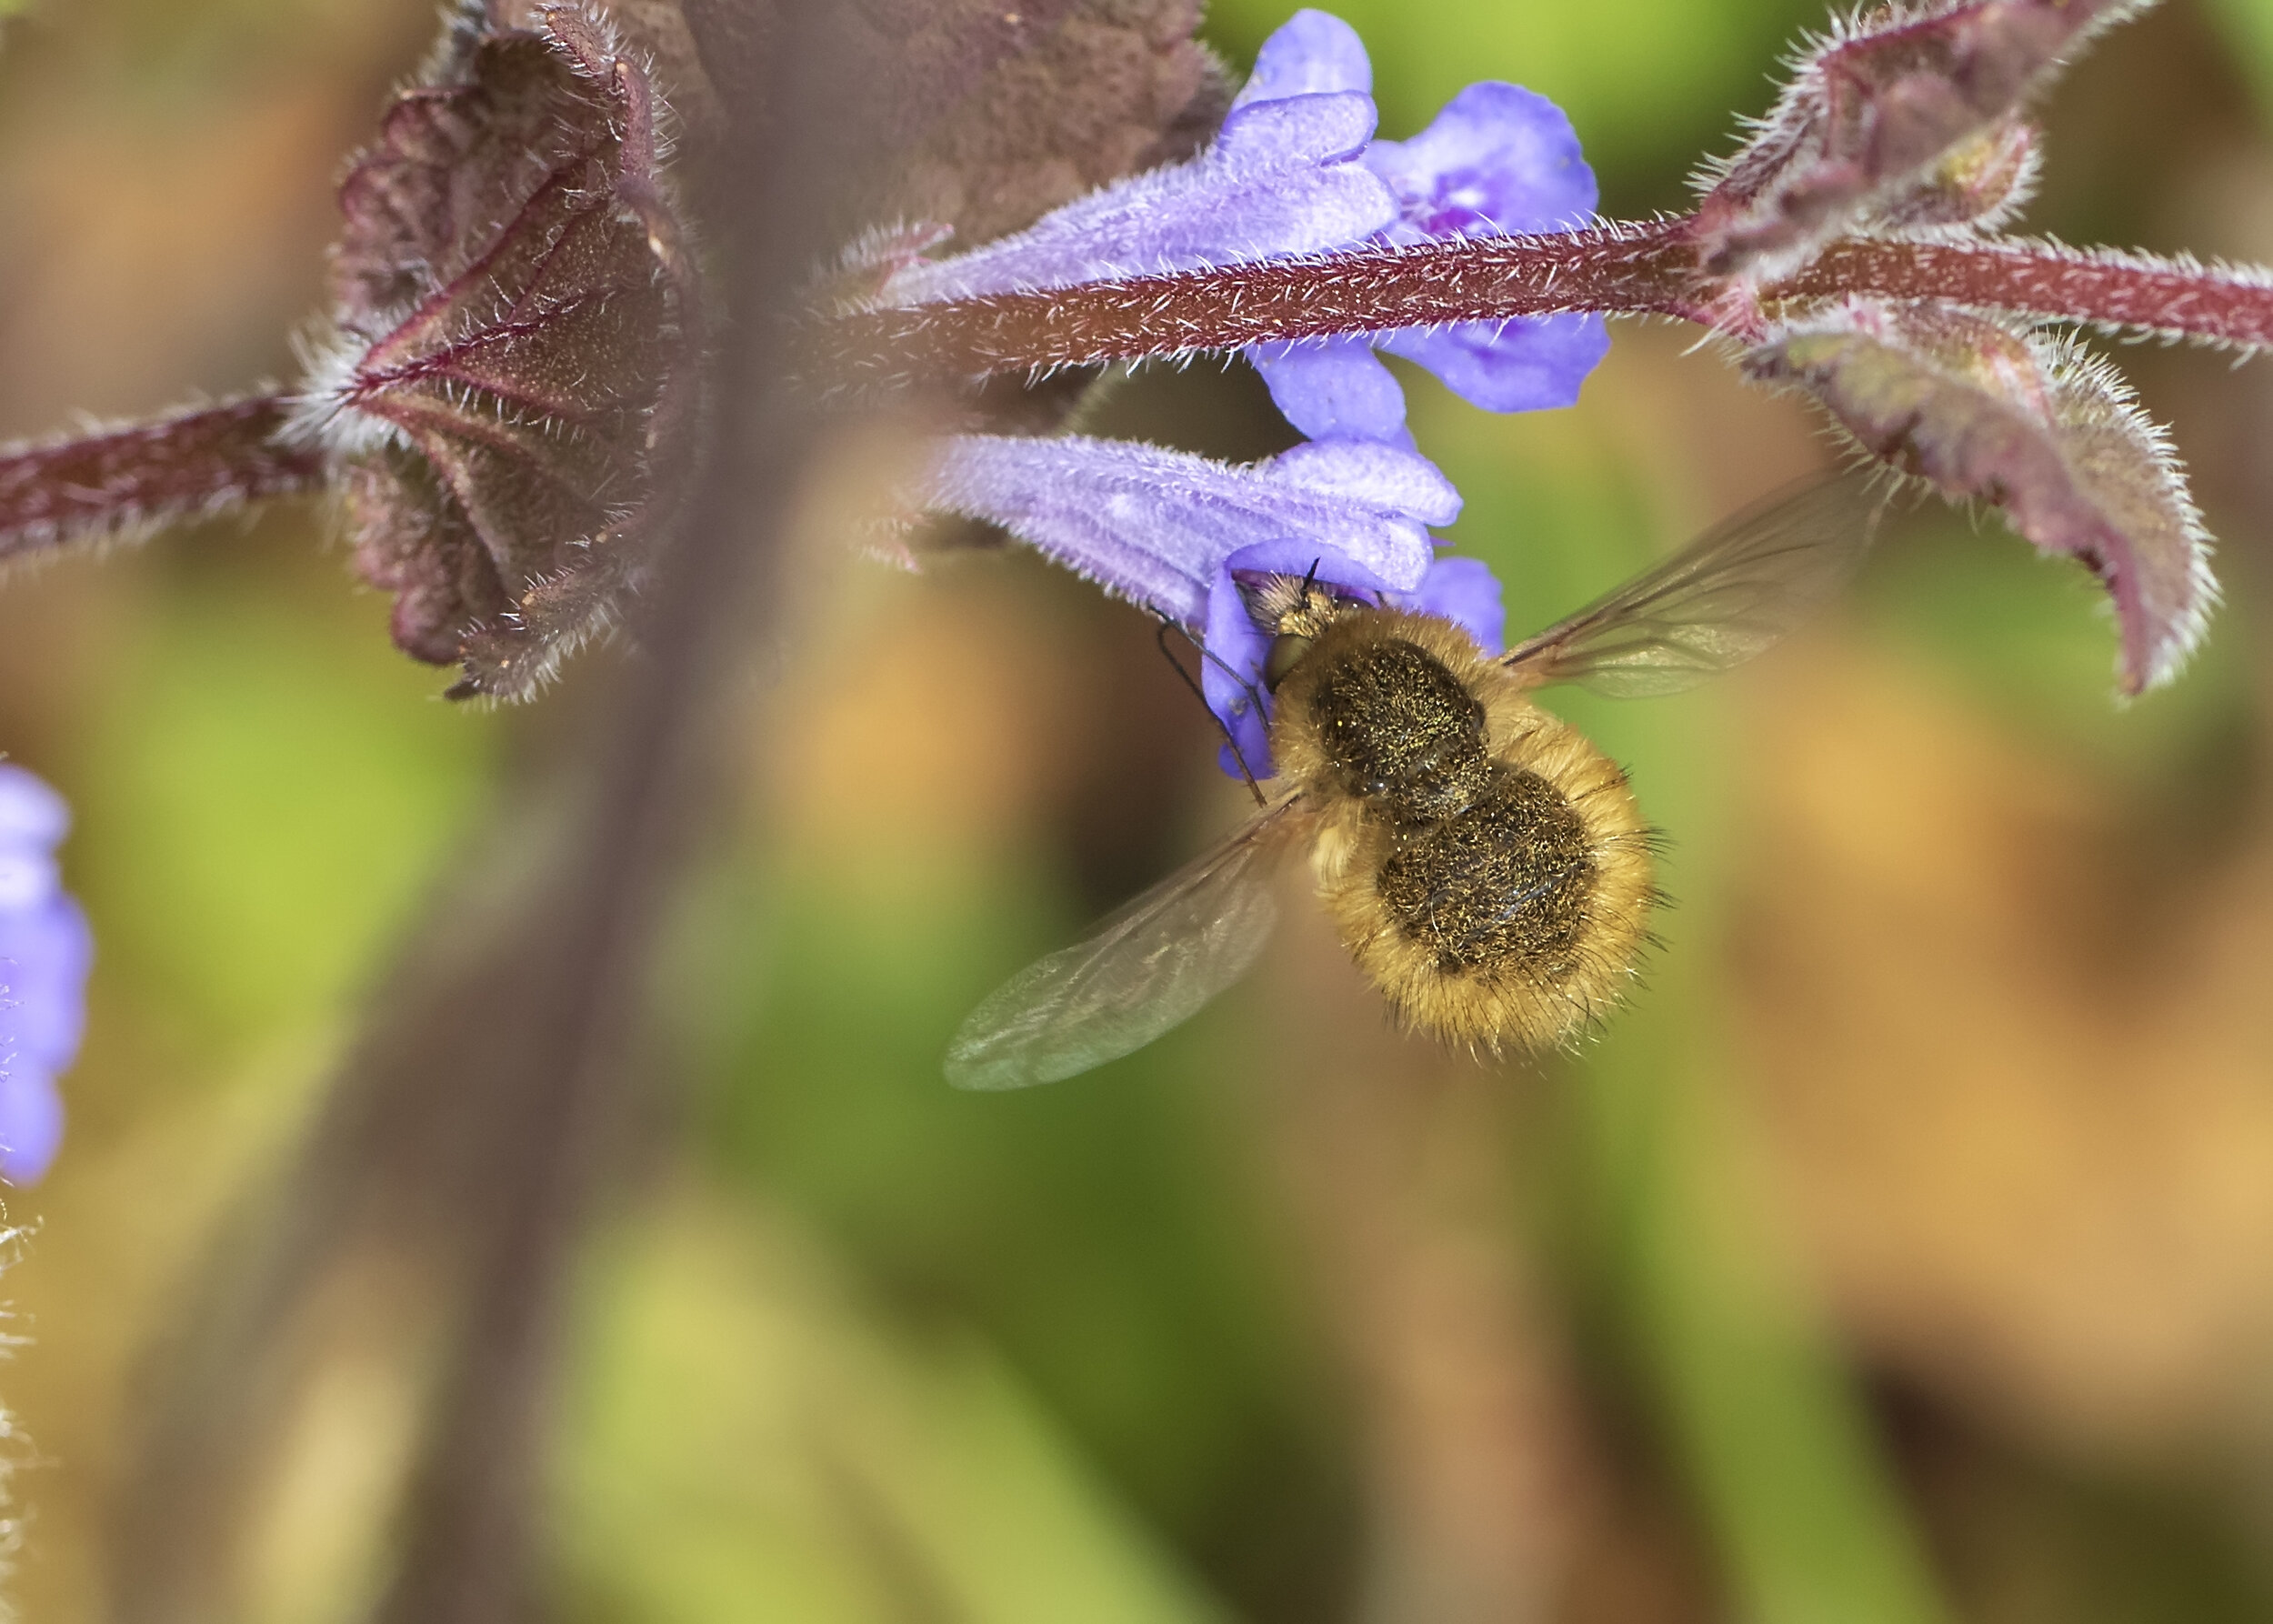 Western bee-fly - Bombylius canescens